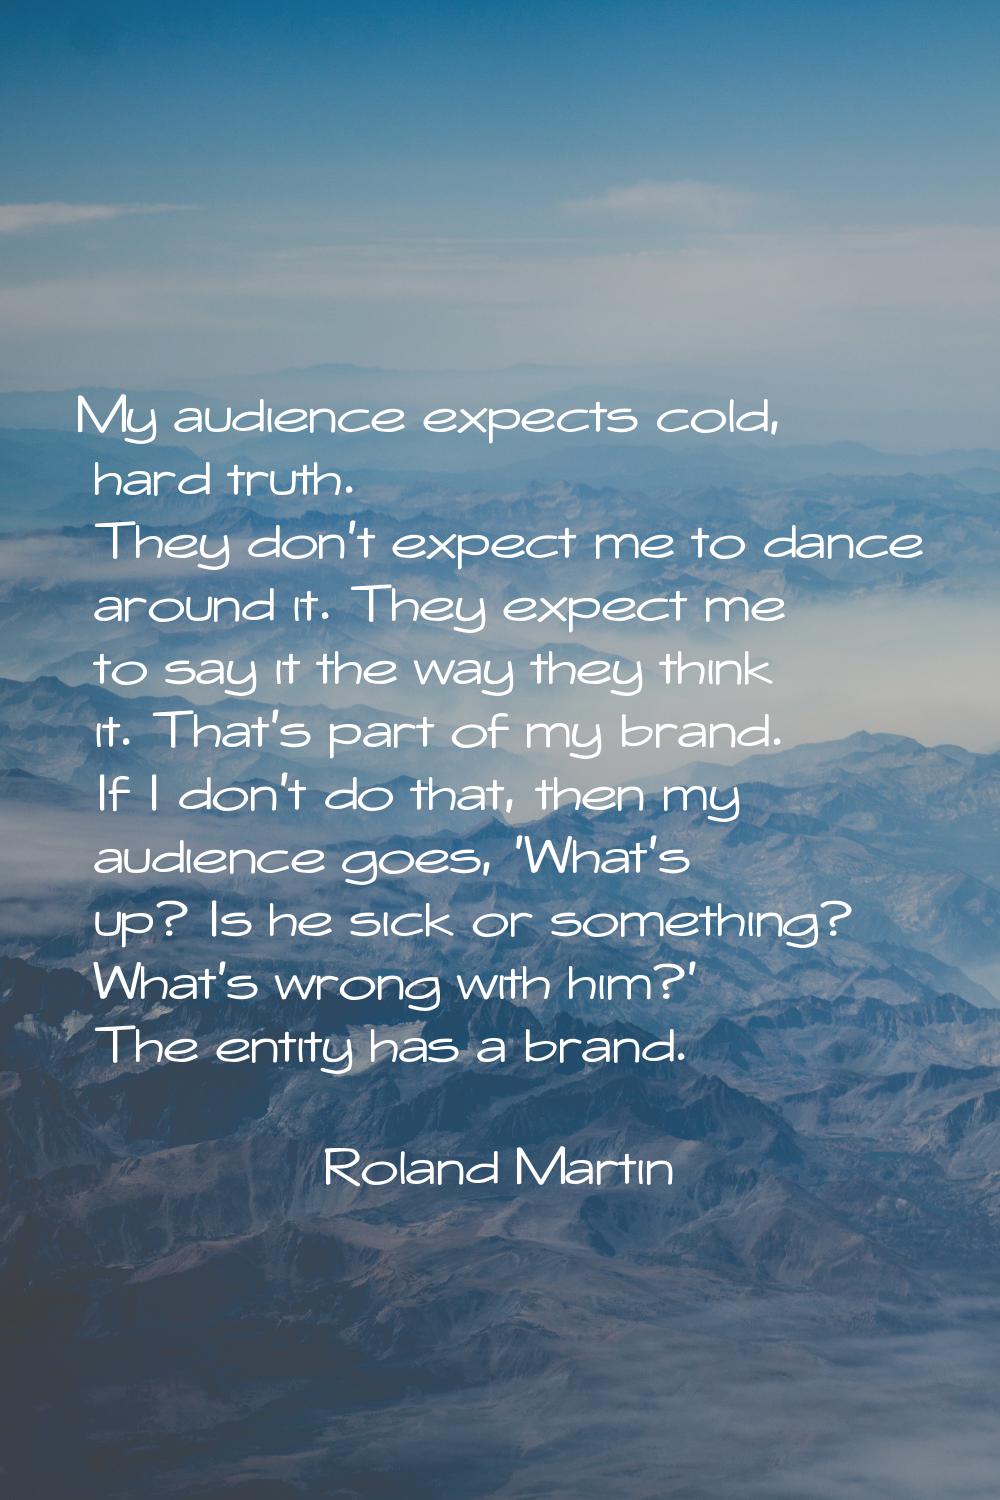 My audience expects cold, hard truth. They don't expect me to dance around it. They expect me to sa